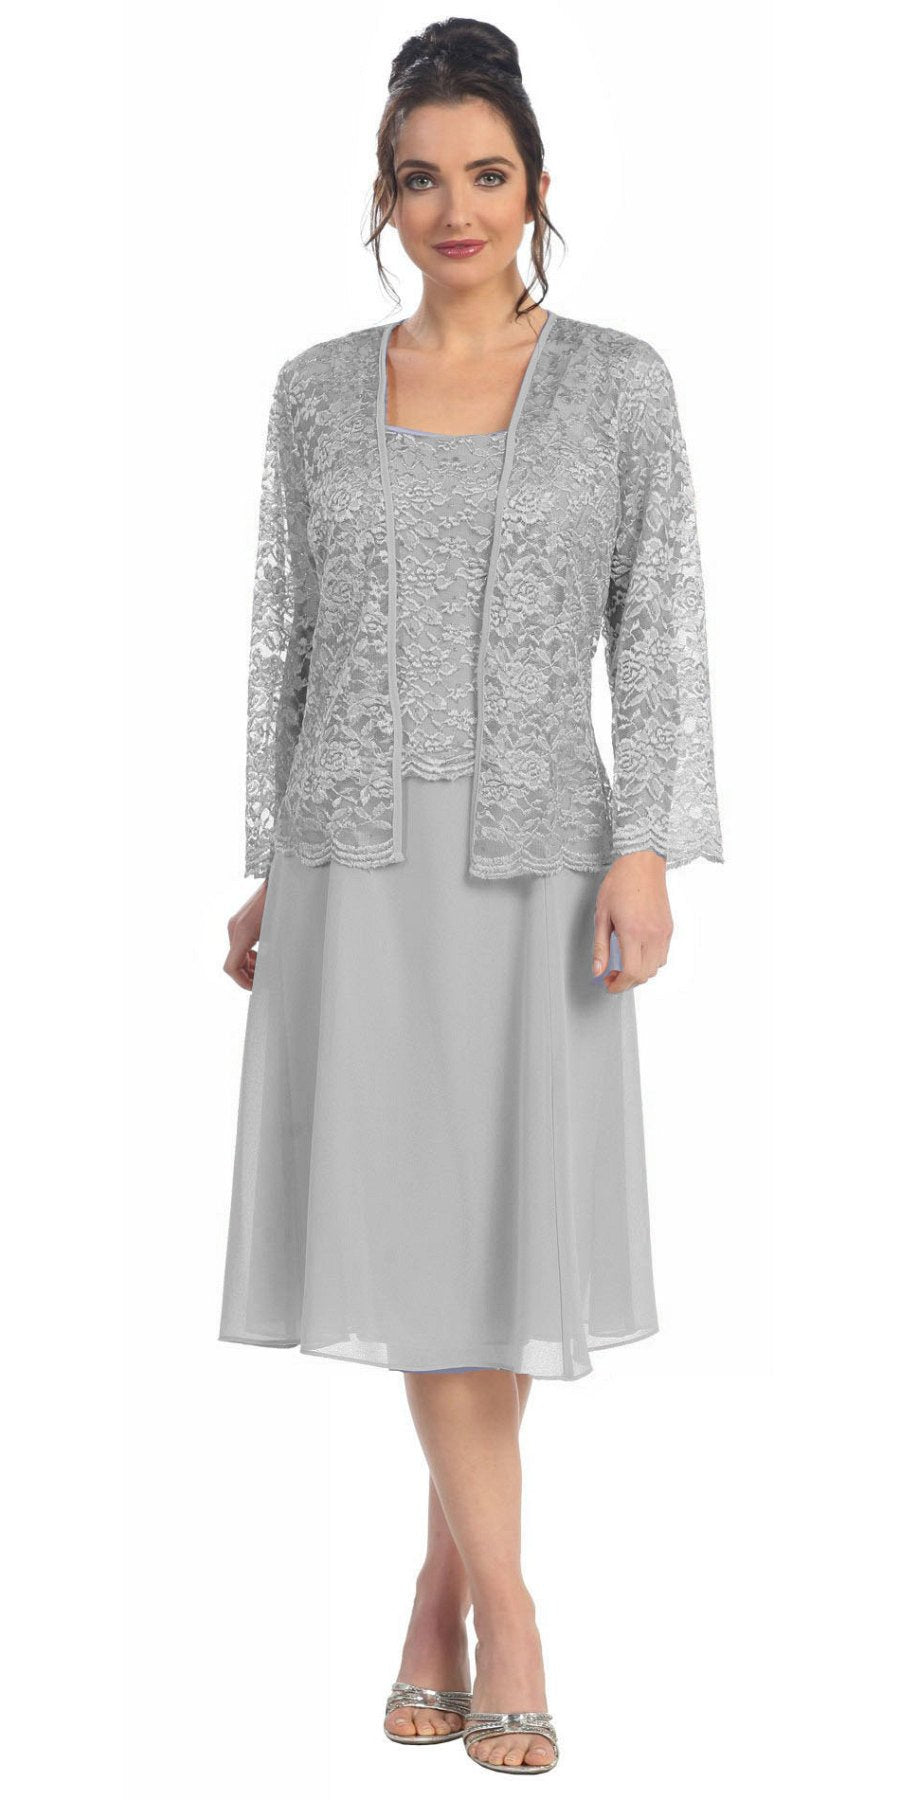 Short Silver Mother of Groom Dress Chiffon Knee Length Lace Jacket